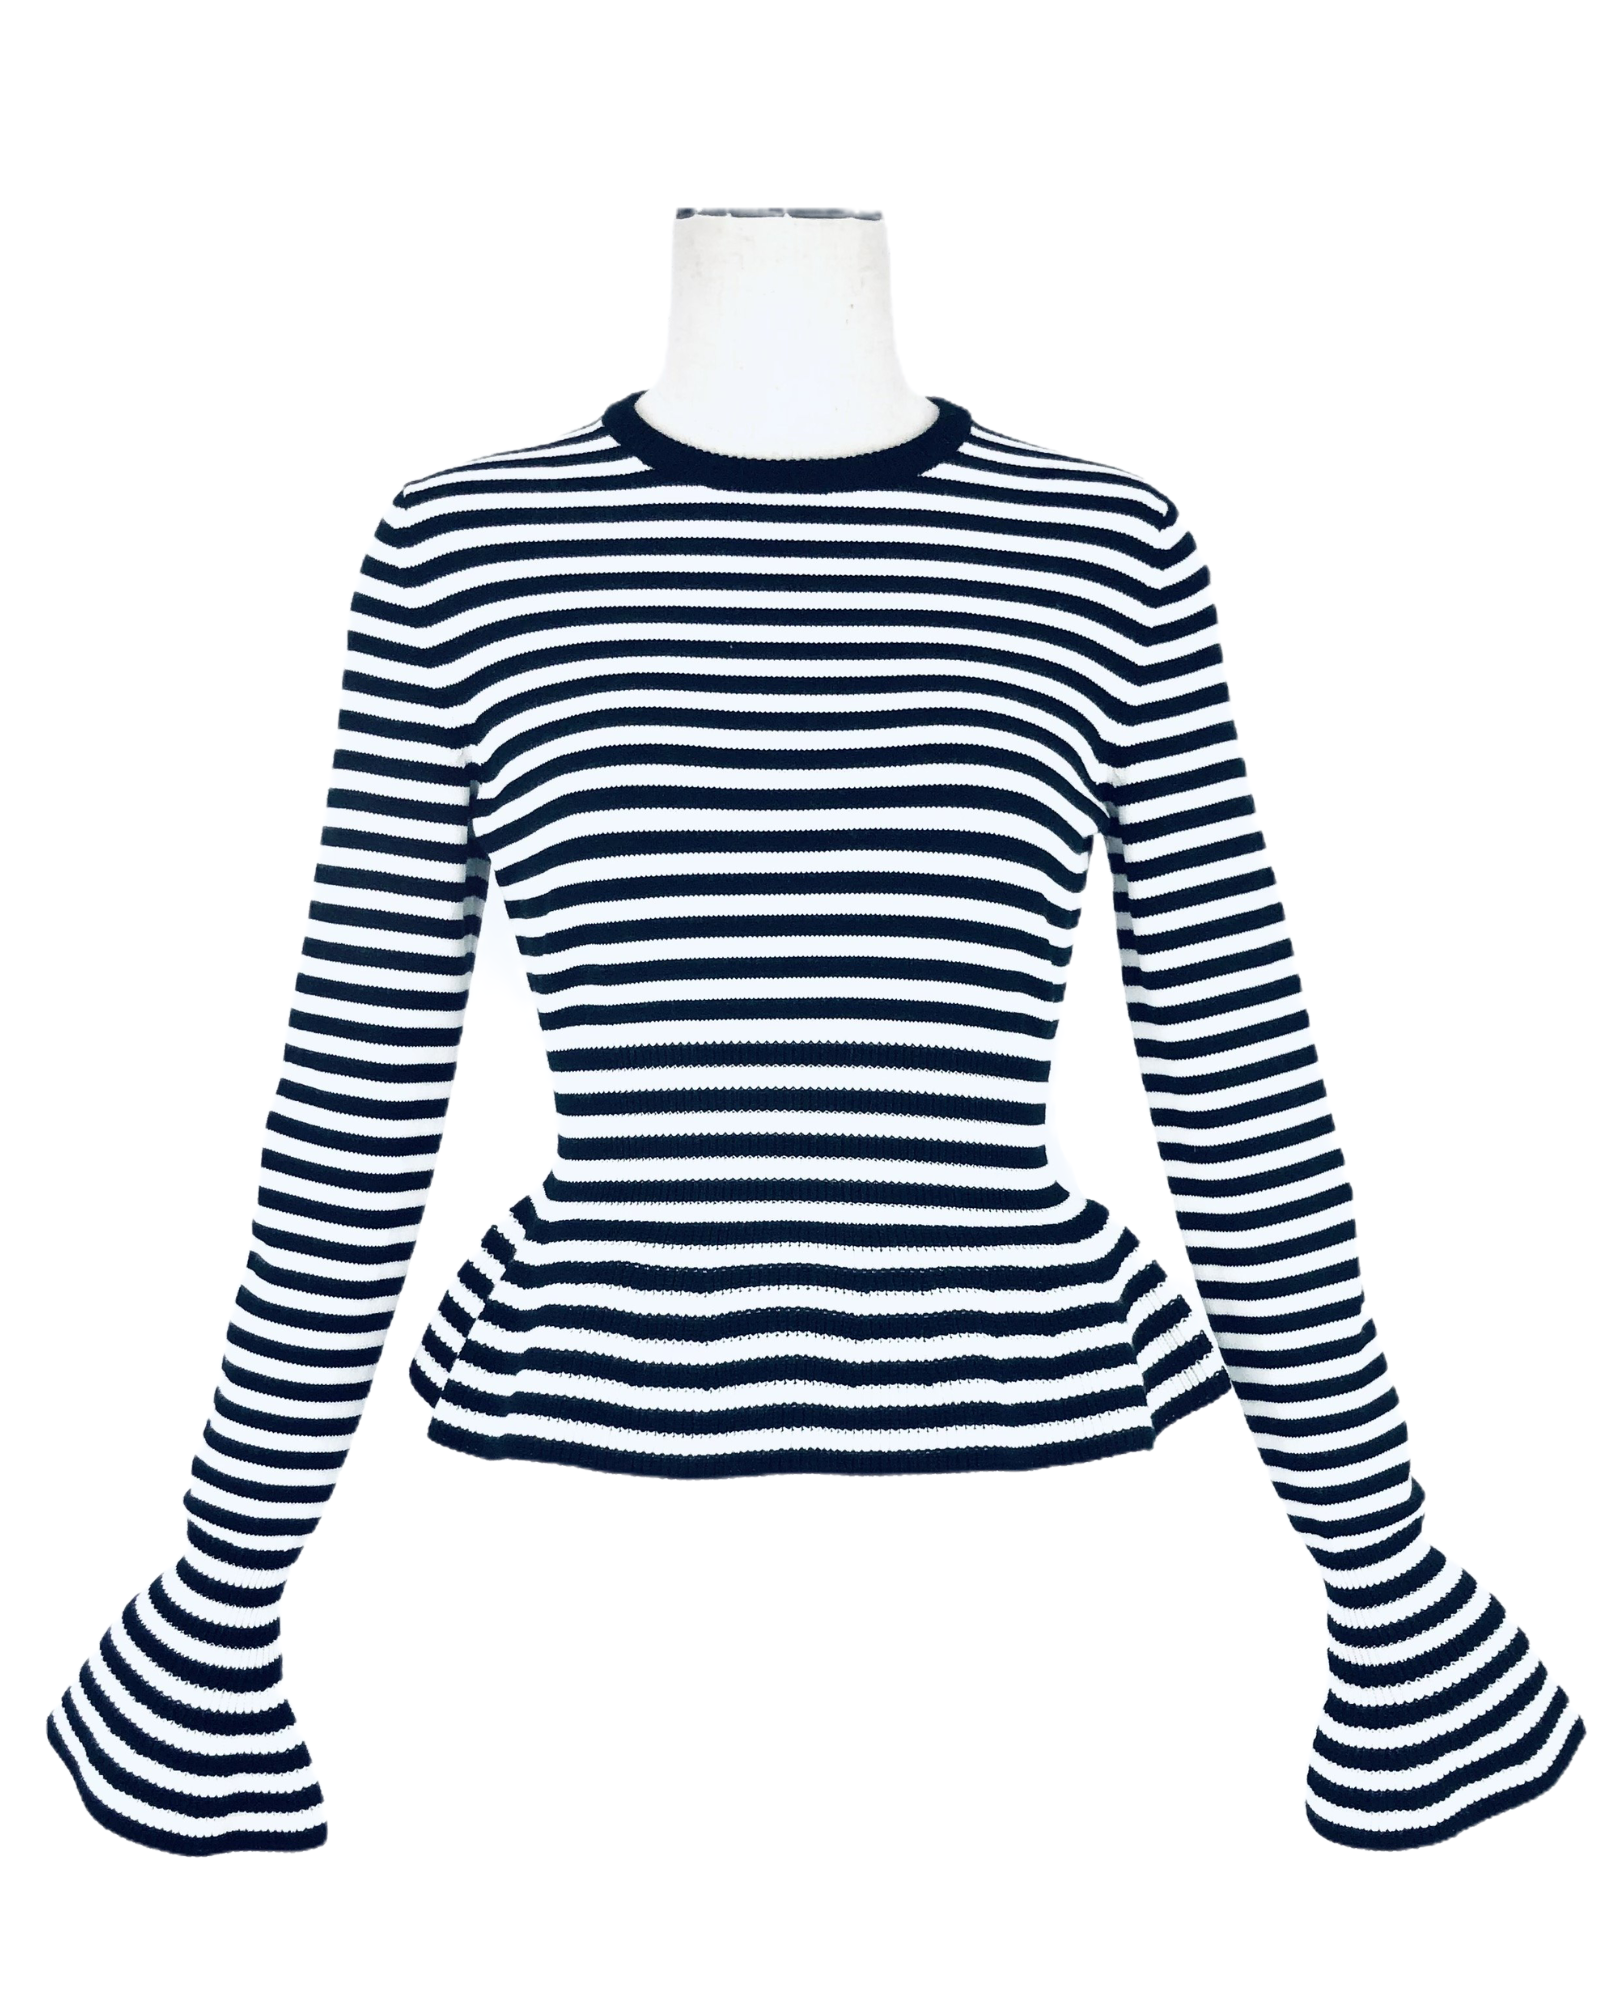 Black and White 'Jerzu' Striped Bell Sleeve Top | Size S